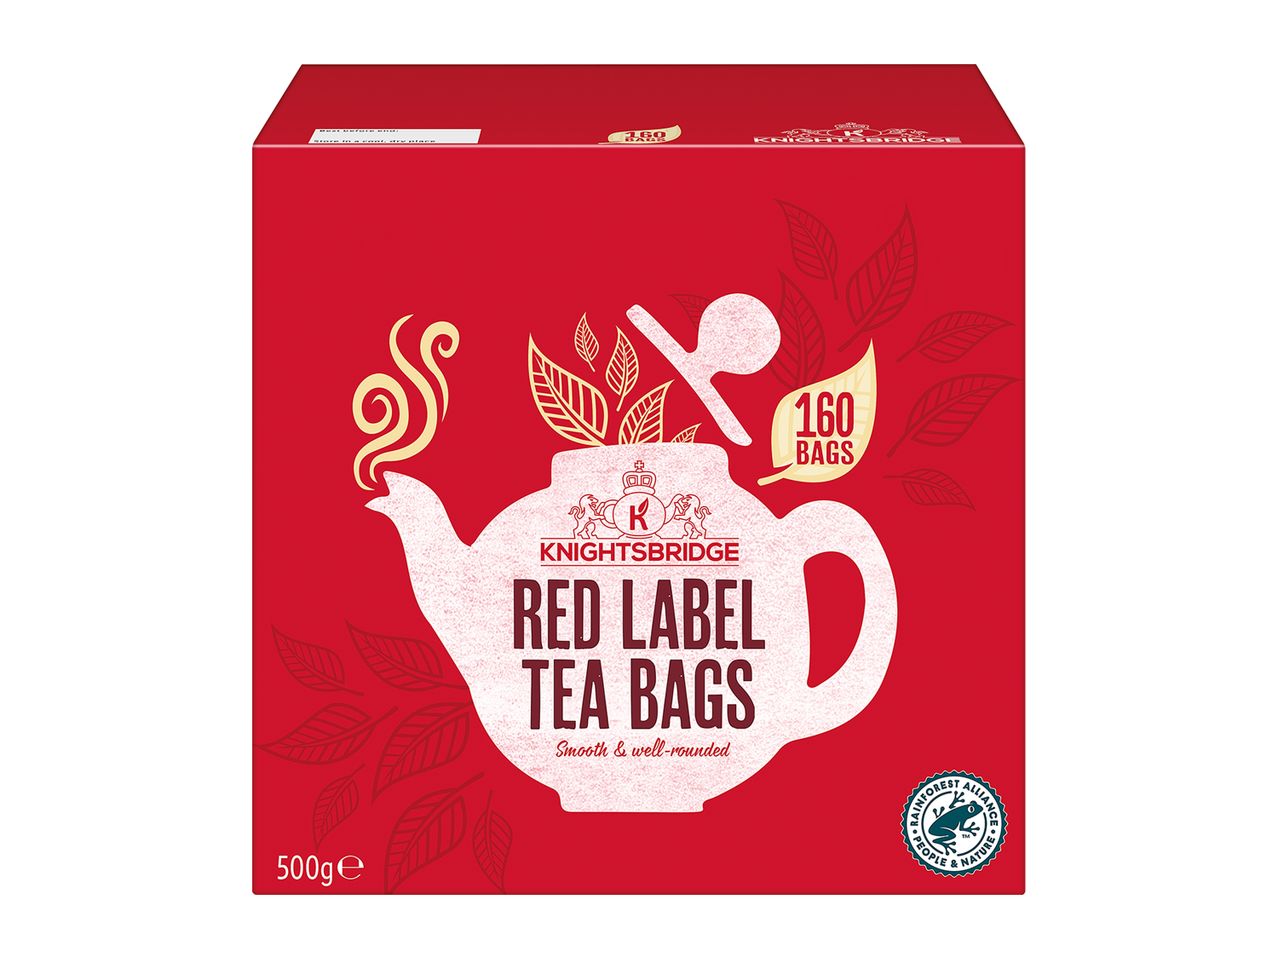 Go to full screen view: Knightsbridge Red Label Tea 240 pack - Image 1